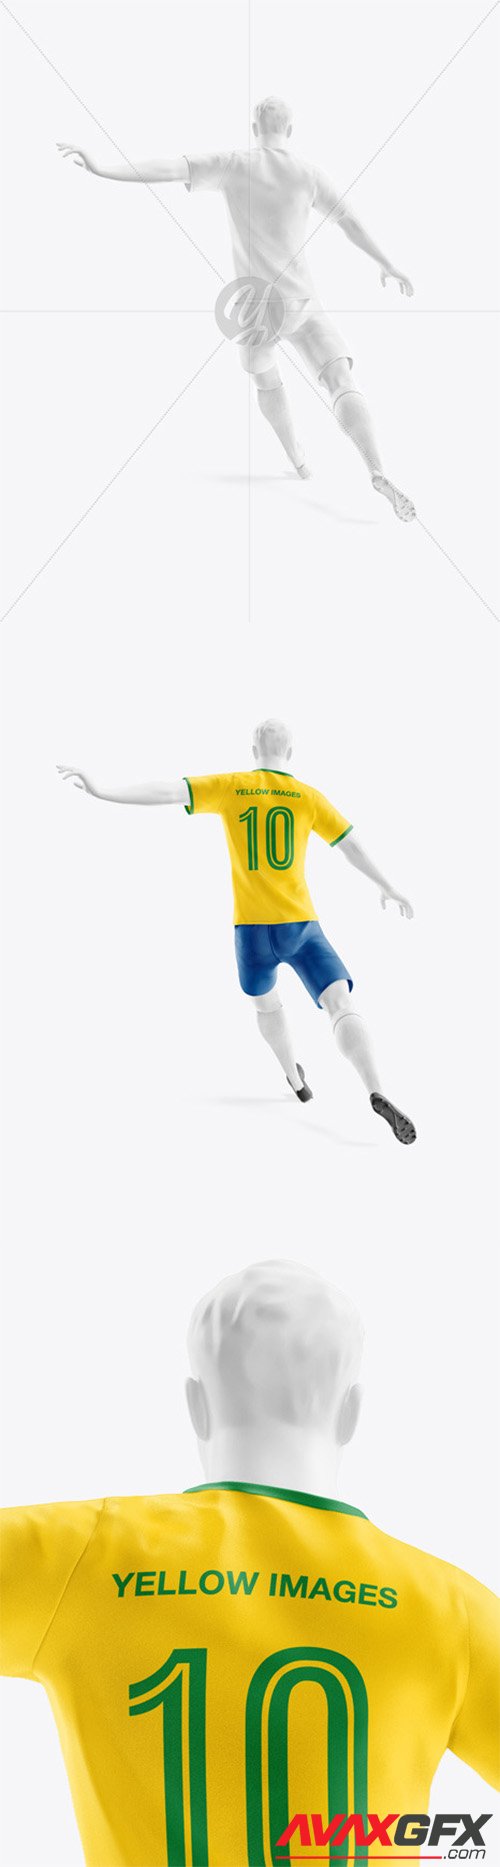 Soccer Team Kit Mockup with mannequin - Back View 63028